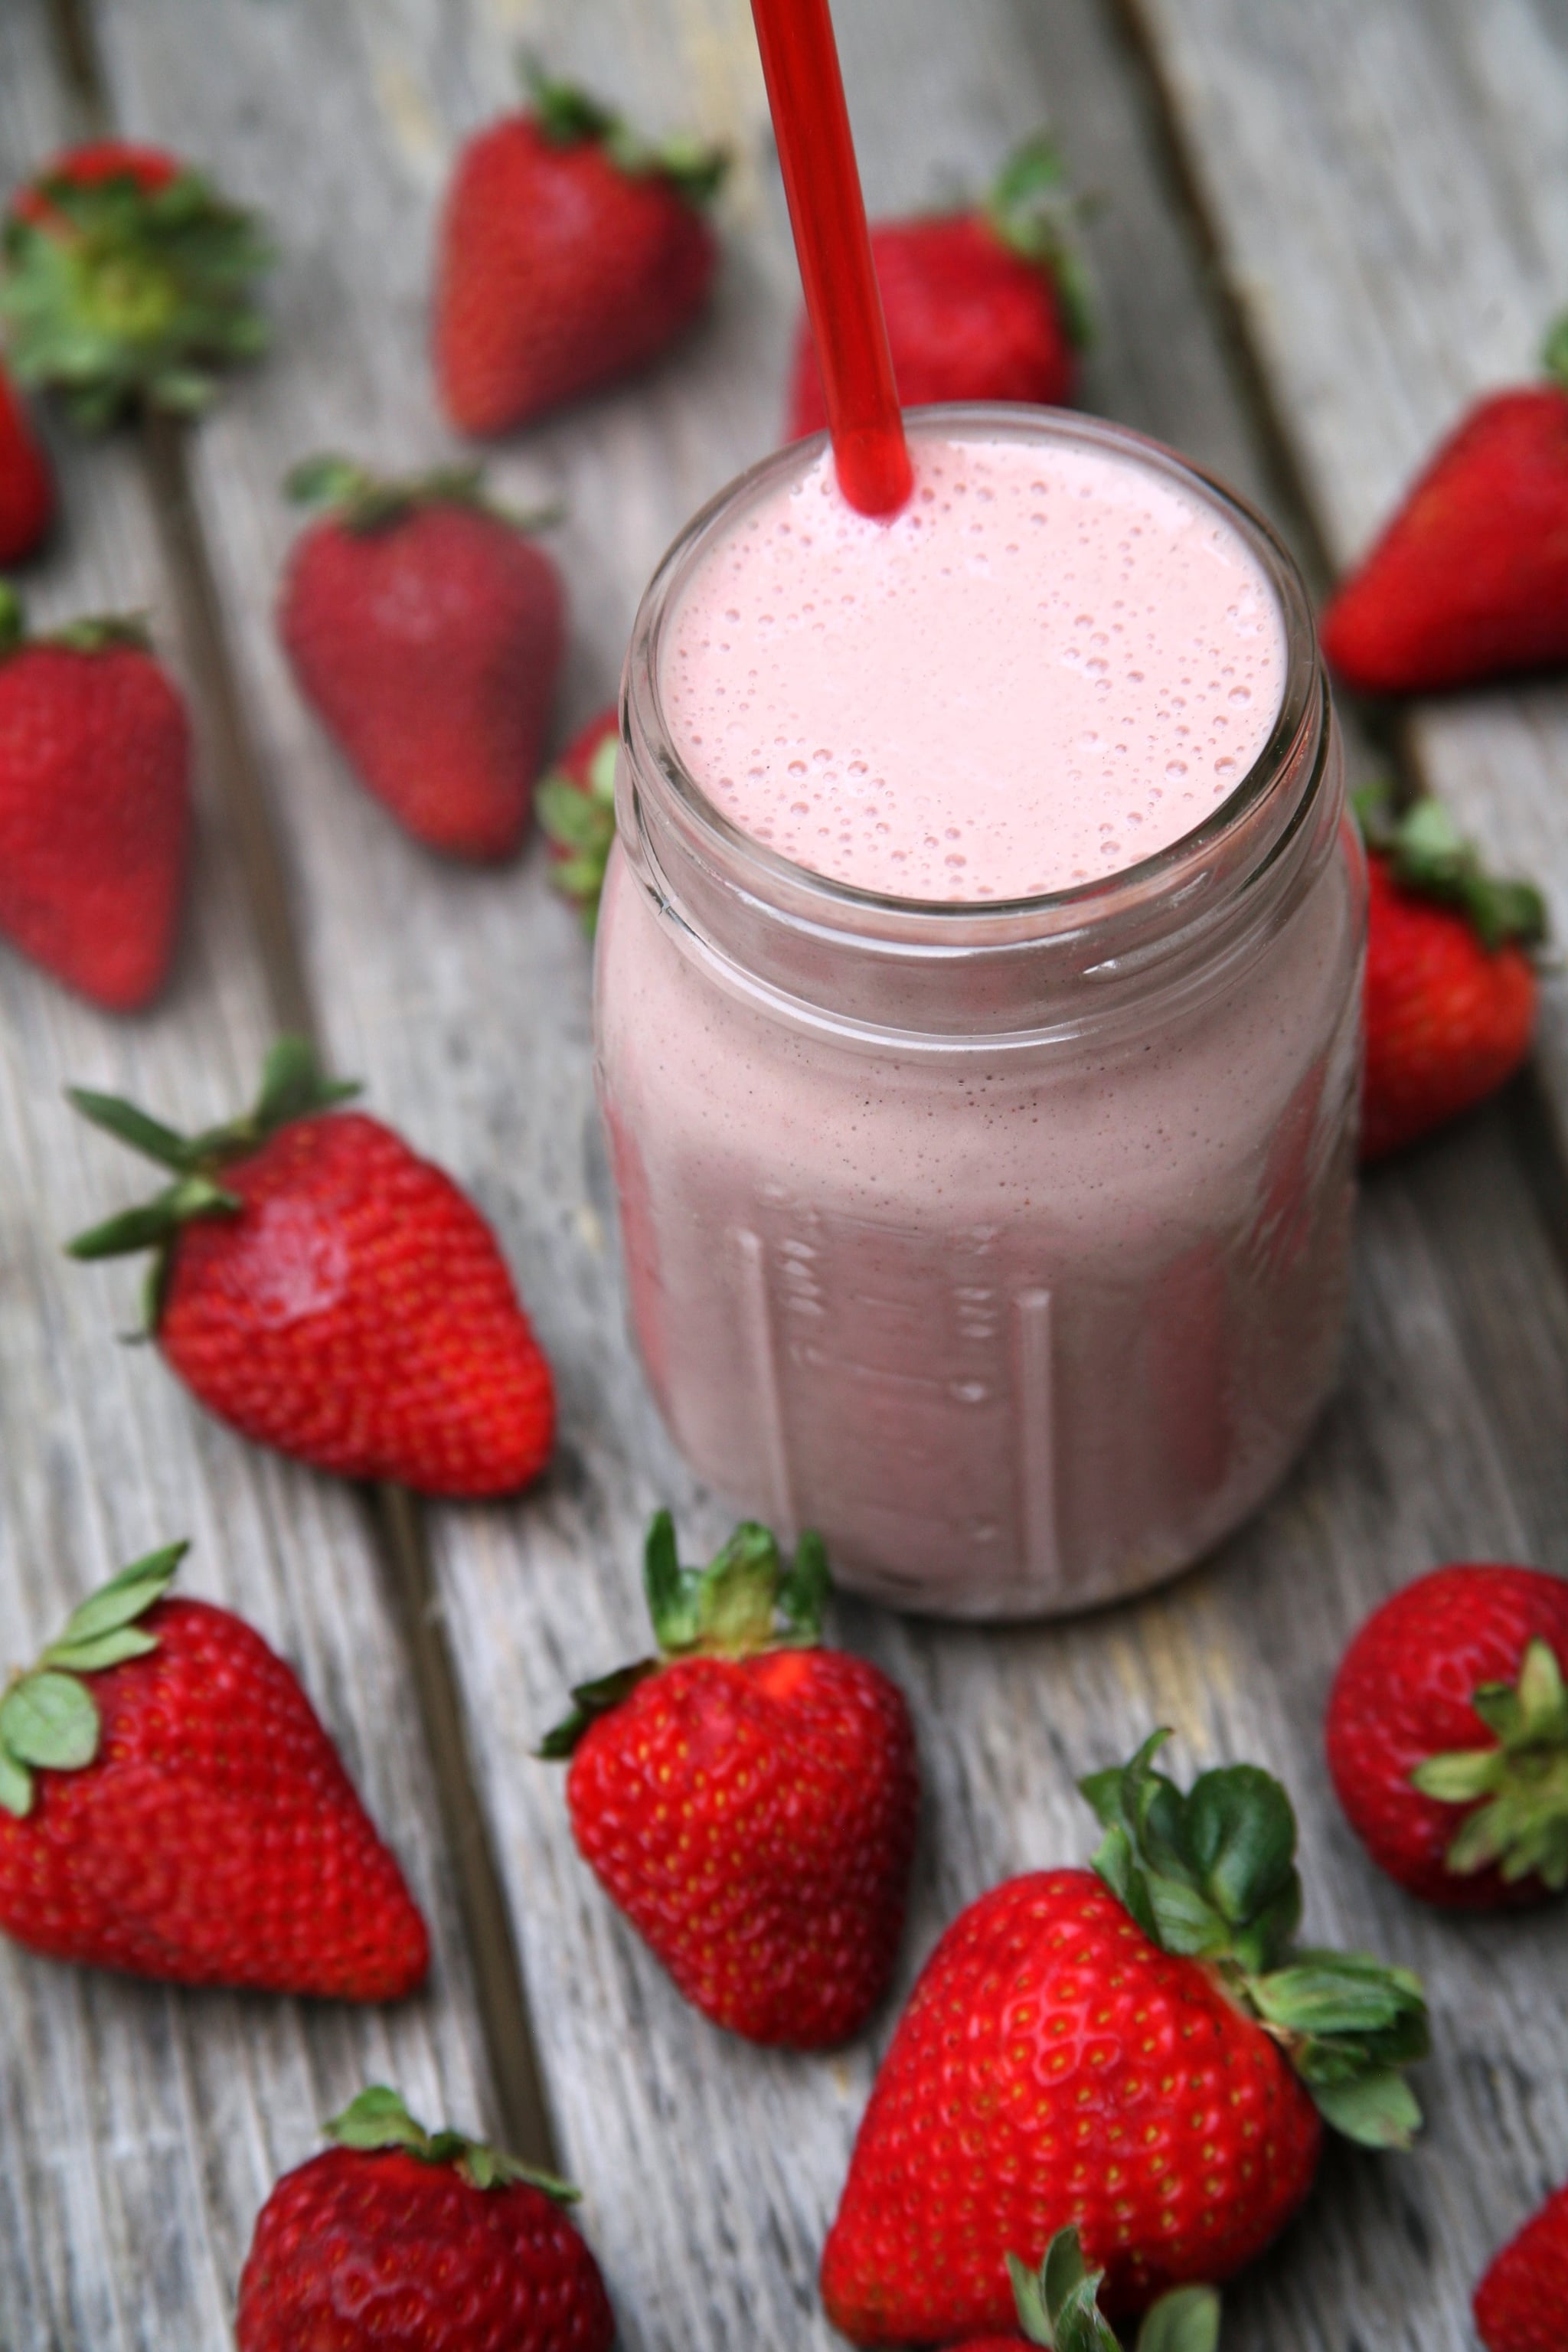 Best Smoothie Recipes For Weight Loss | POPSUGAR Fitness